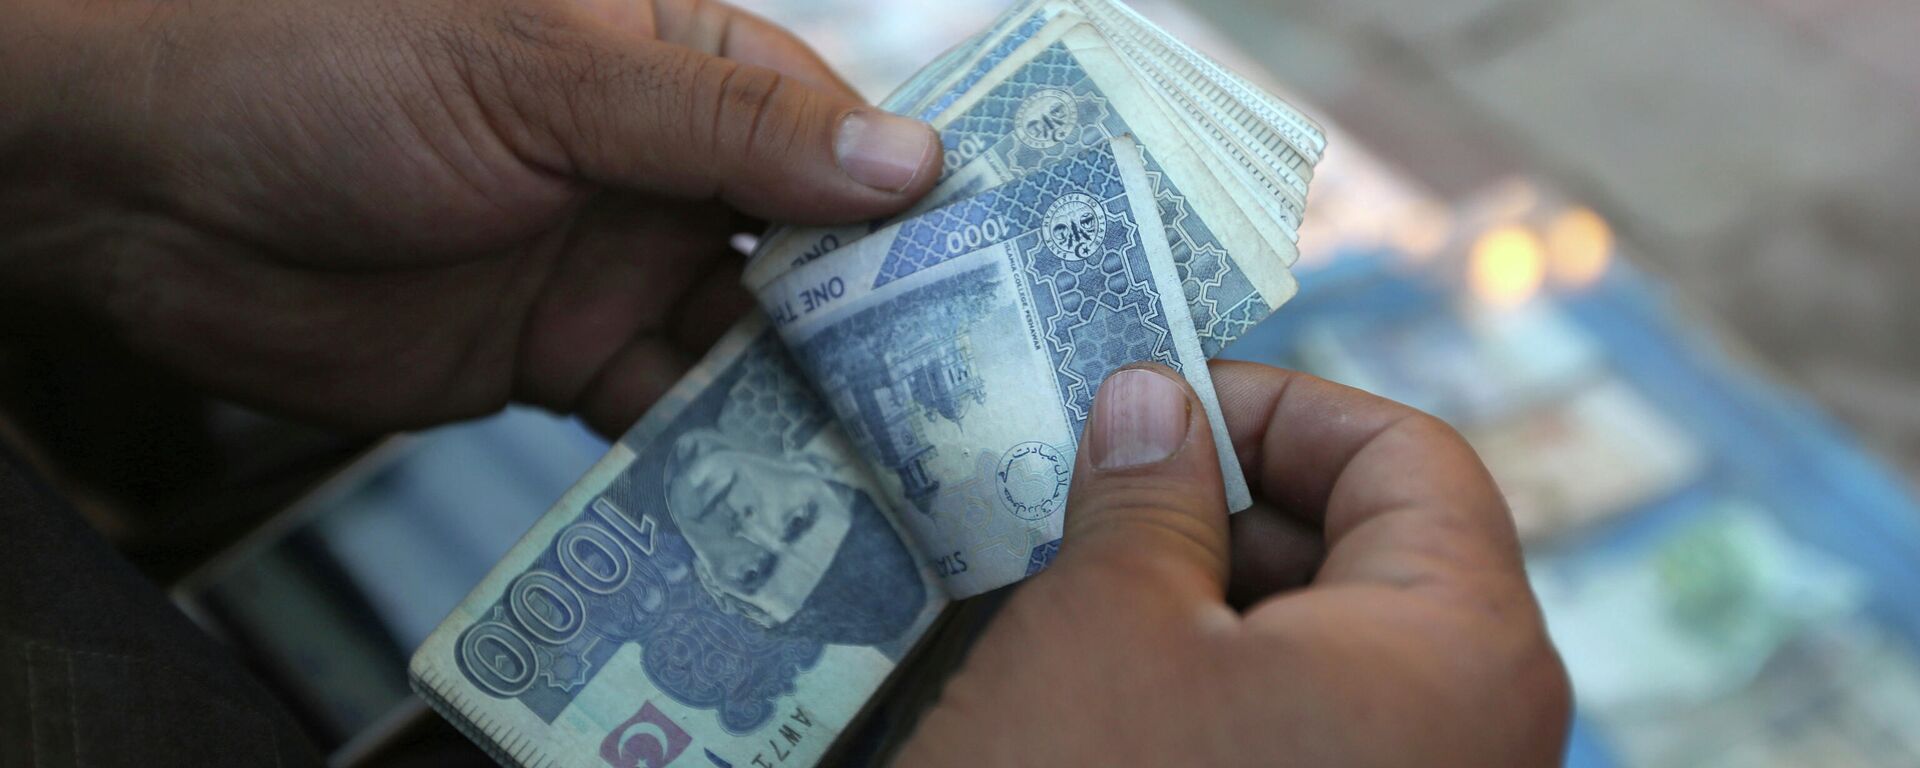 In this Monday, Dec. 5, 2016 photo, an Afghan money changer counts Pakistani currency banknotes at a money exchange market in Kabul, Afghanistan. Afghans are increasingly uncertain about their future, less confident in their government and more pessimistic than before on issues such as security, corruption, and rising unemployment, according to the annual survey by the San Francisco-based Asia Foundation released on Wednesday, Dec. 7, 2016. (AP Photo/Rahmat Gul) - Sputnik International, 1920, 26.06.2022